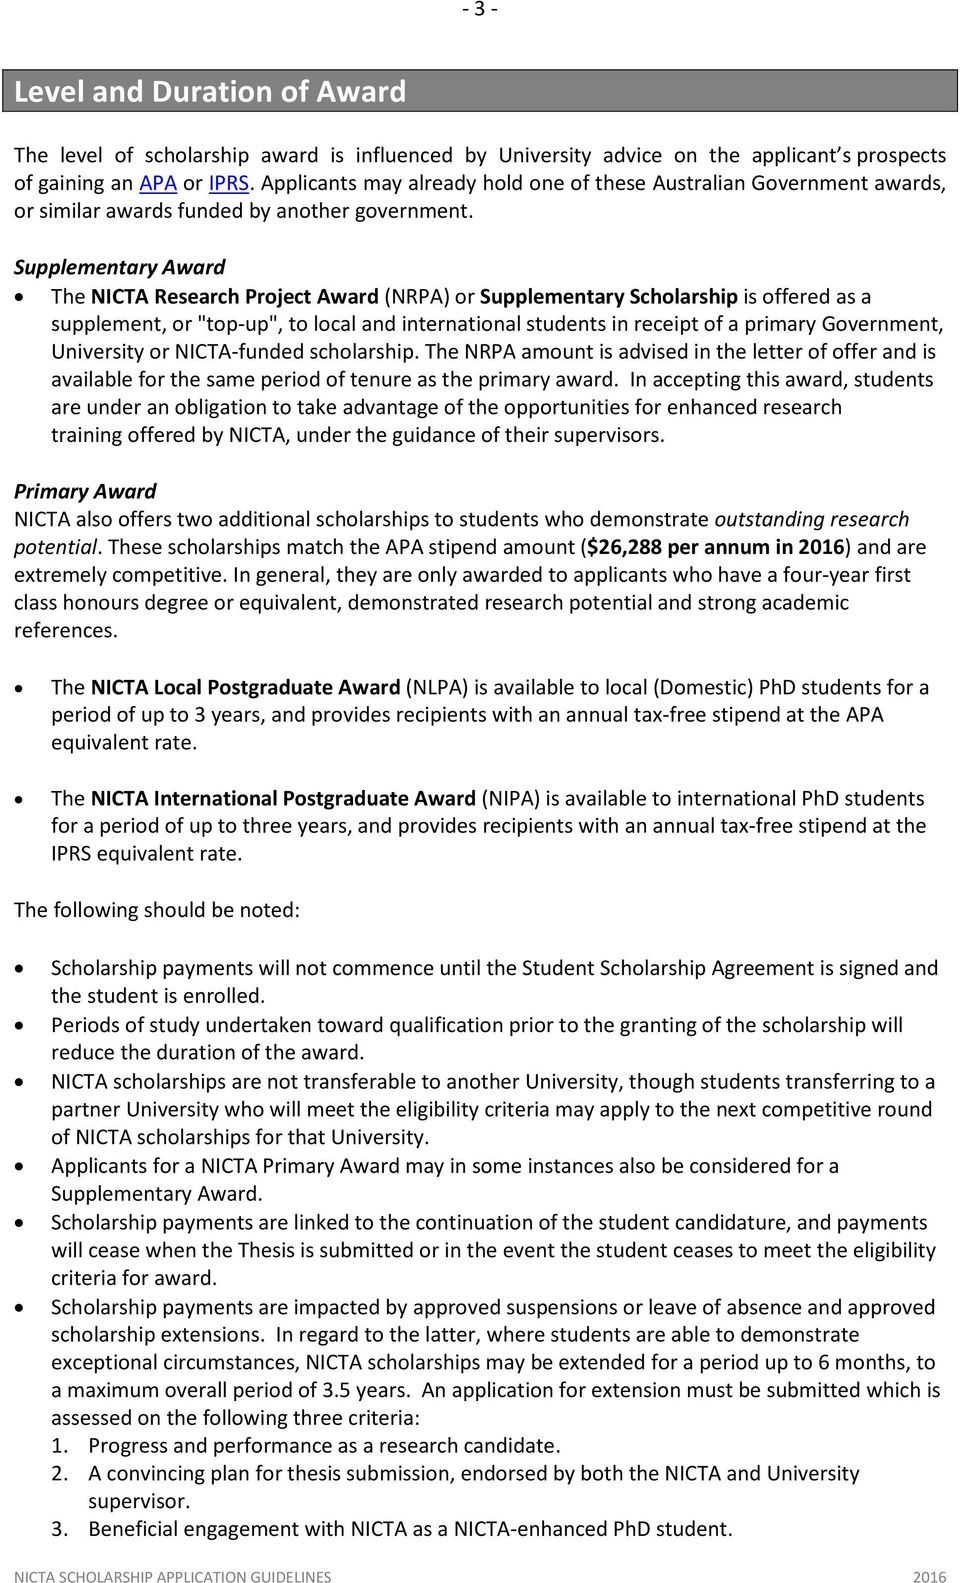 Supplementary Award The NICTA Research Project Award (NRPA) or Supplementary Scholarship is offered as a supplement, or "top-up", to local and international students in receipt of a primary